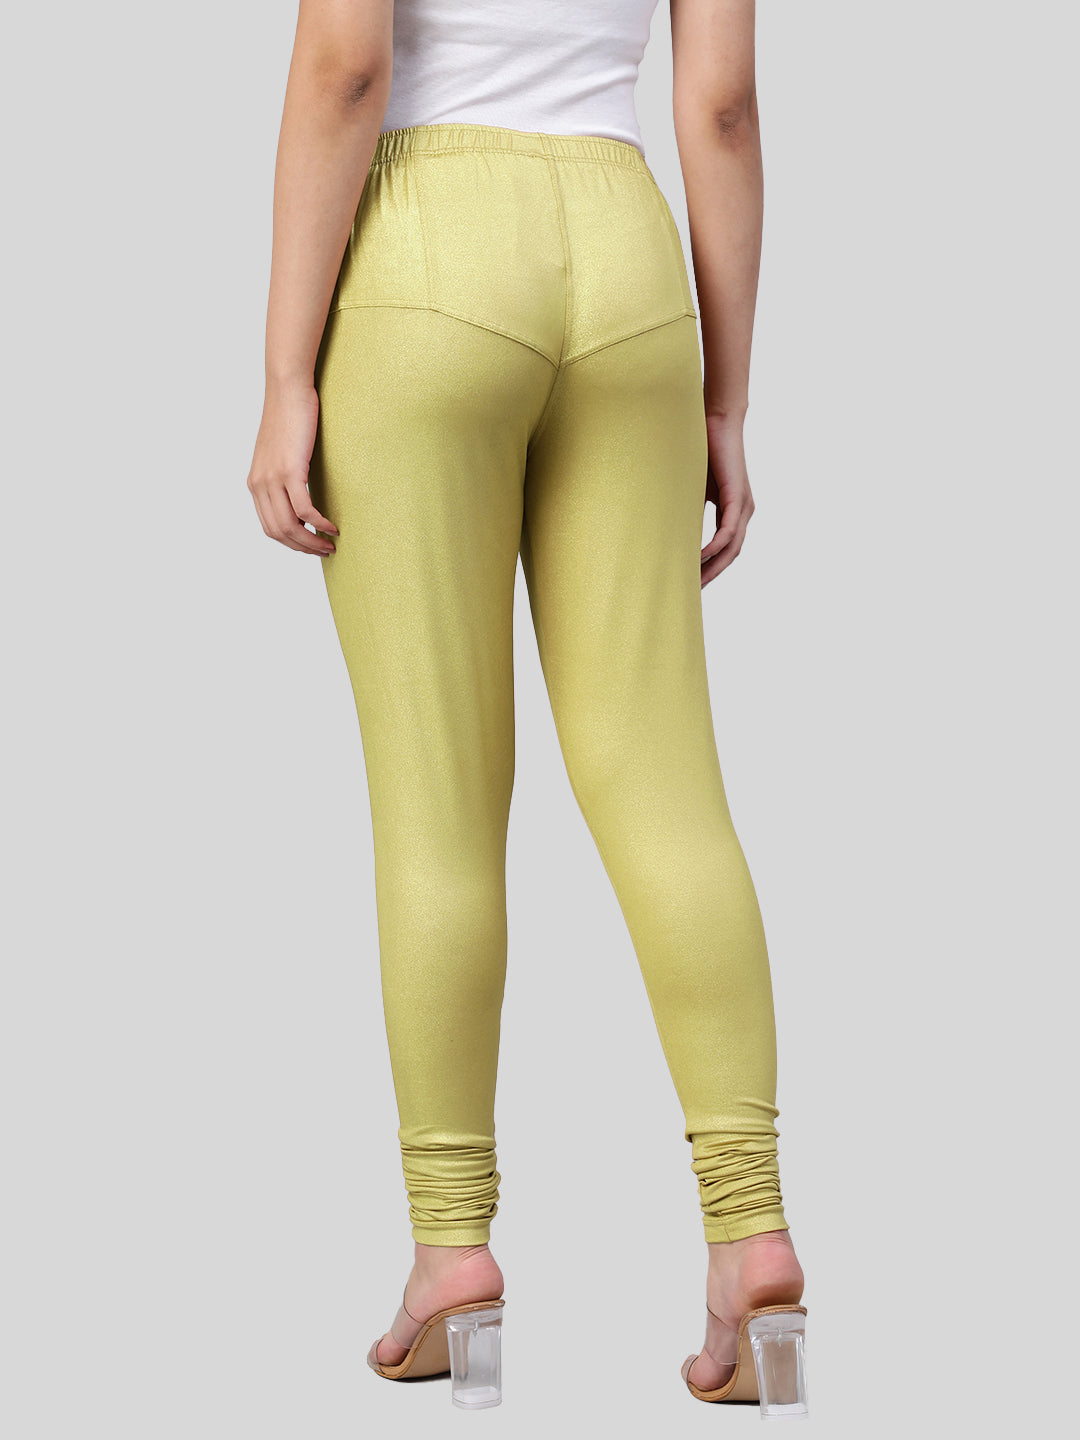 High Waisted Colored Leggings - Yellow